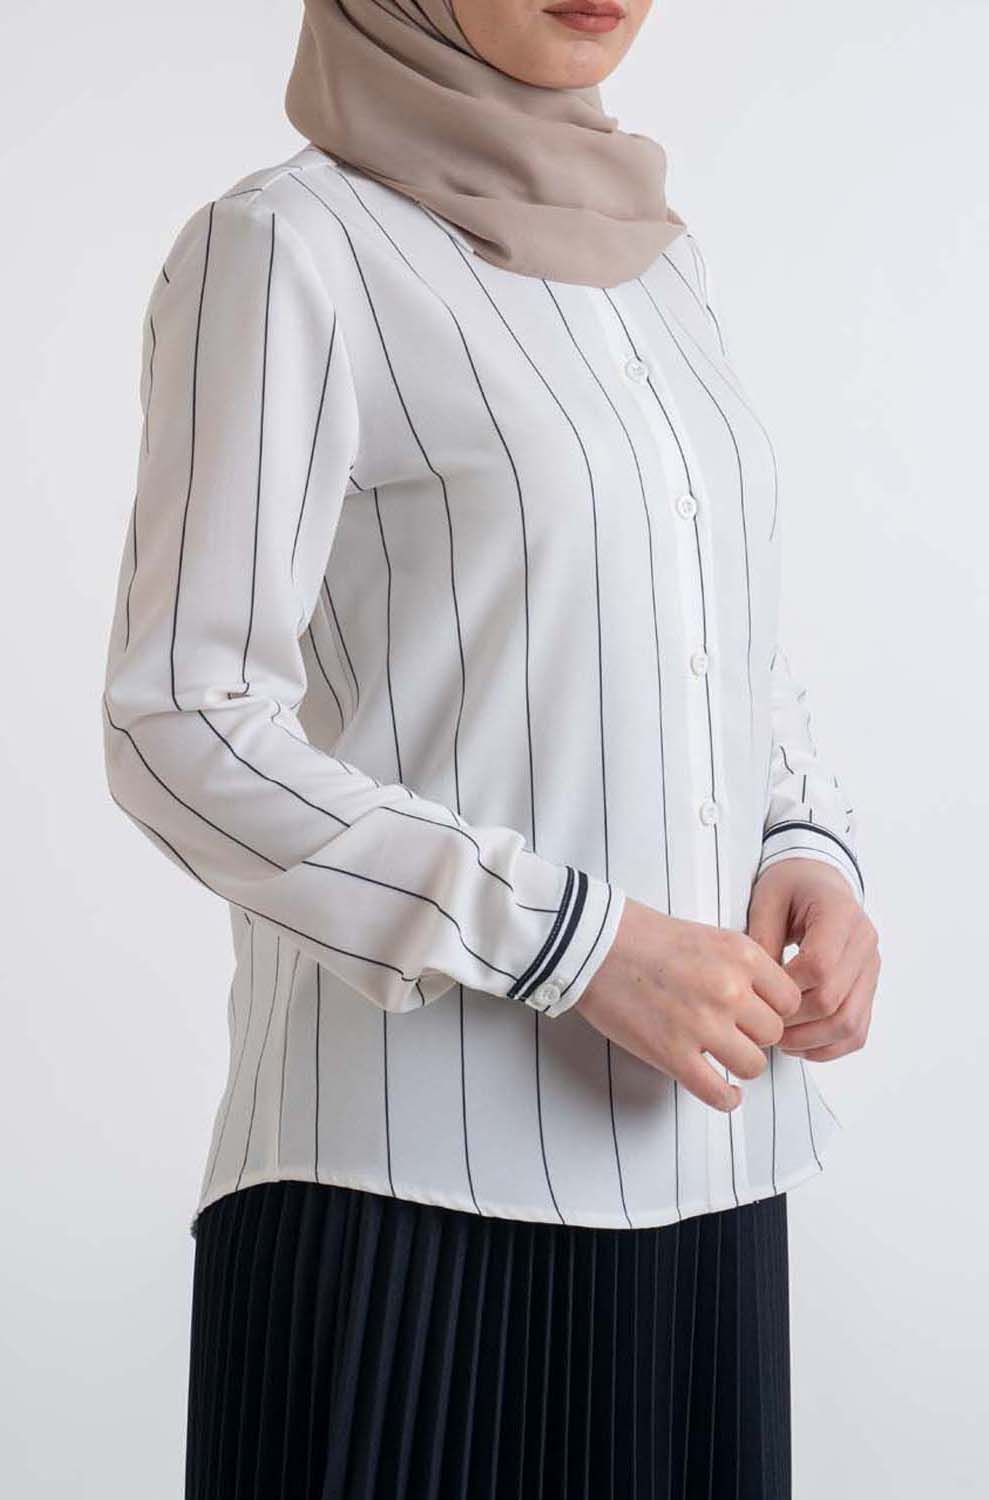 High Neck Long Sleeve Top in White - Modest Fashion